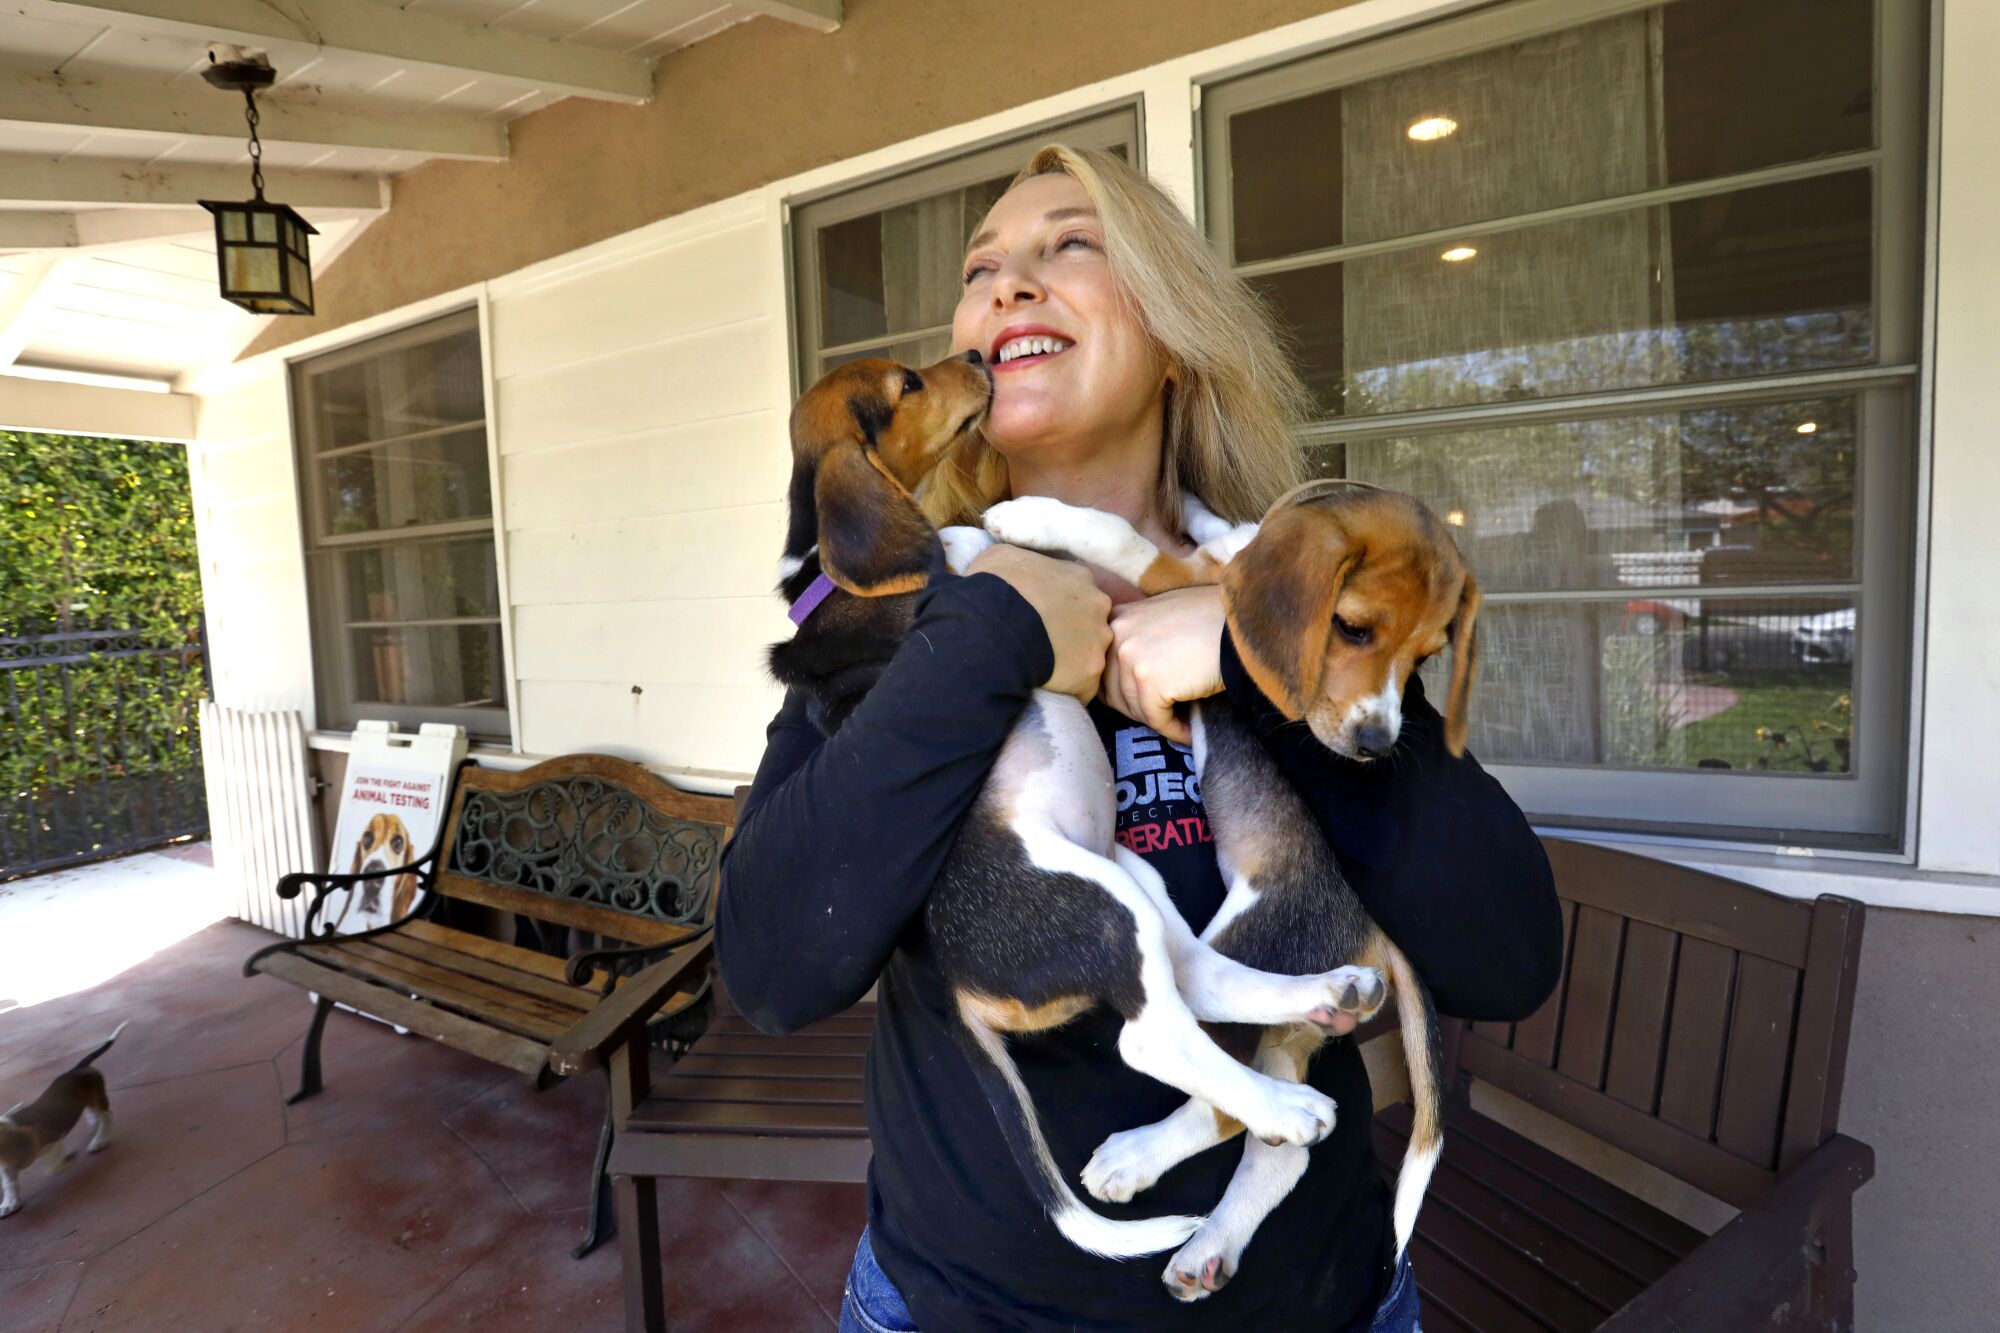 A woman hugs two beagle puppies she is holding.